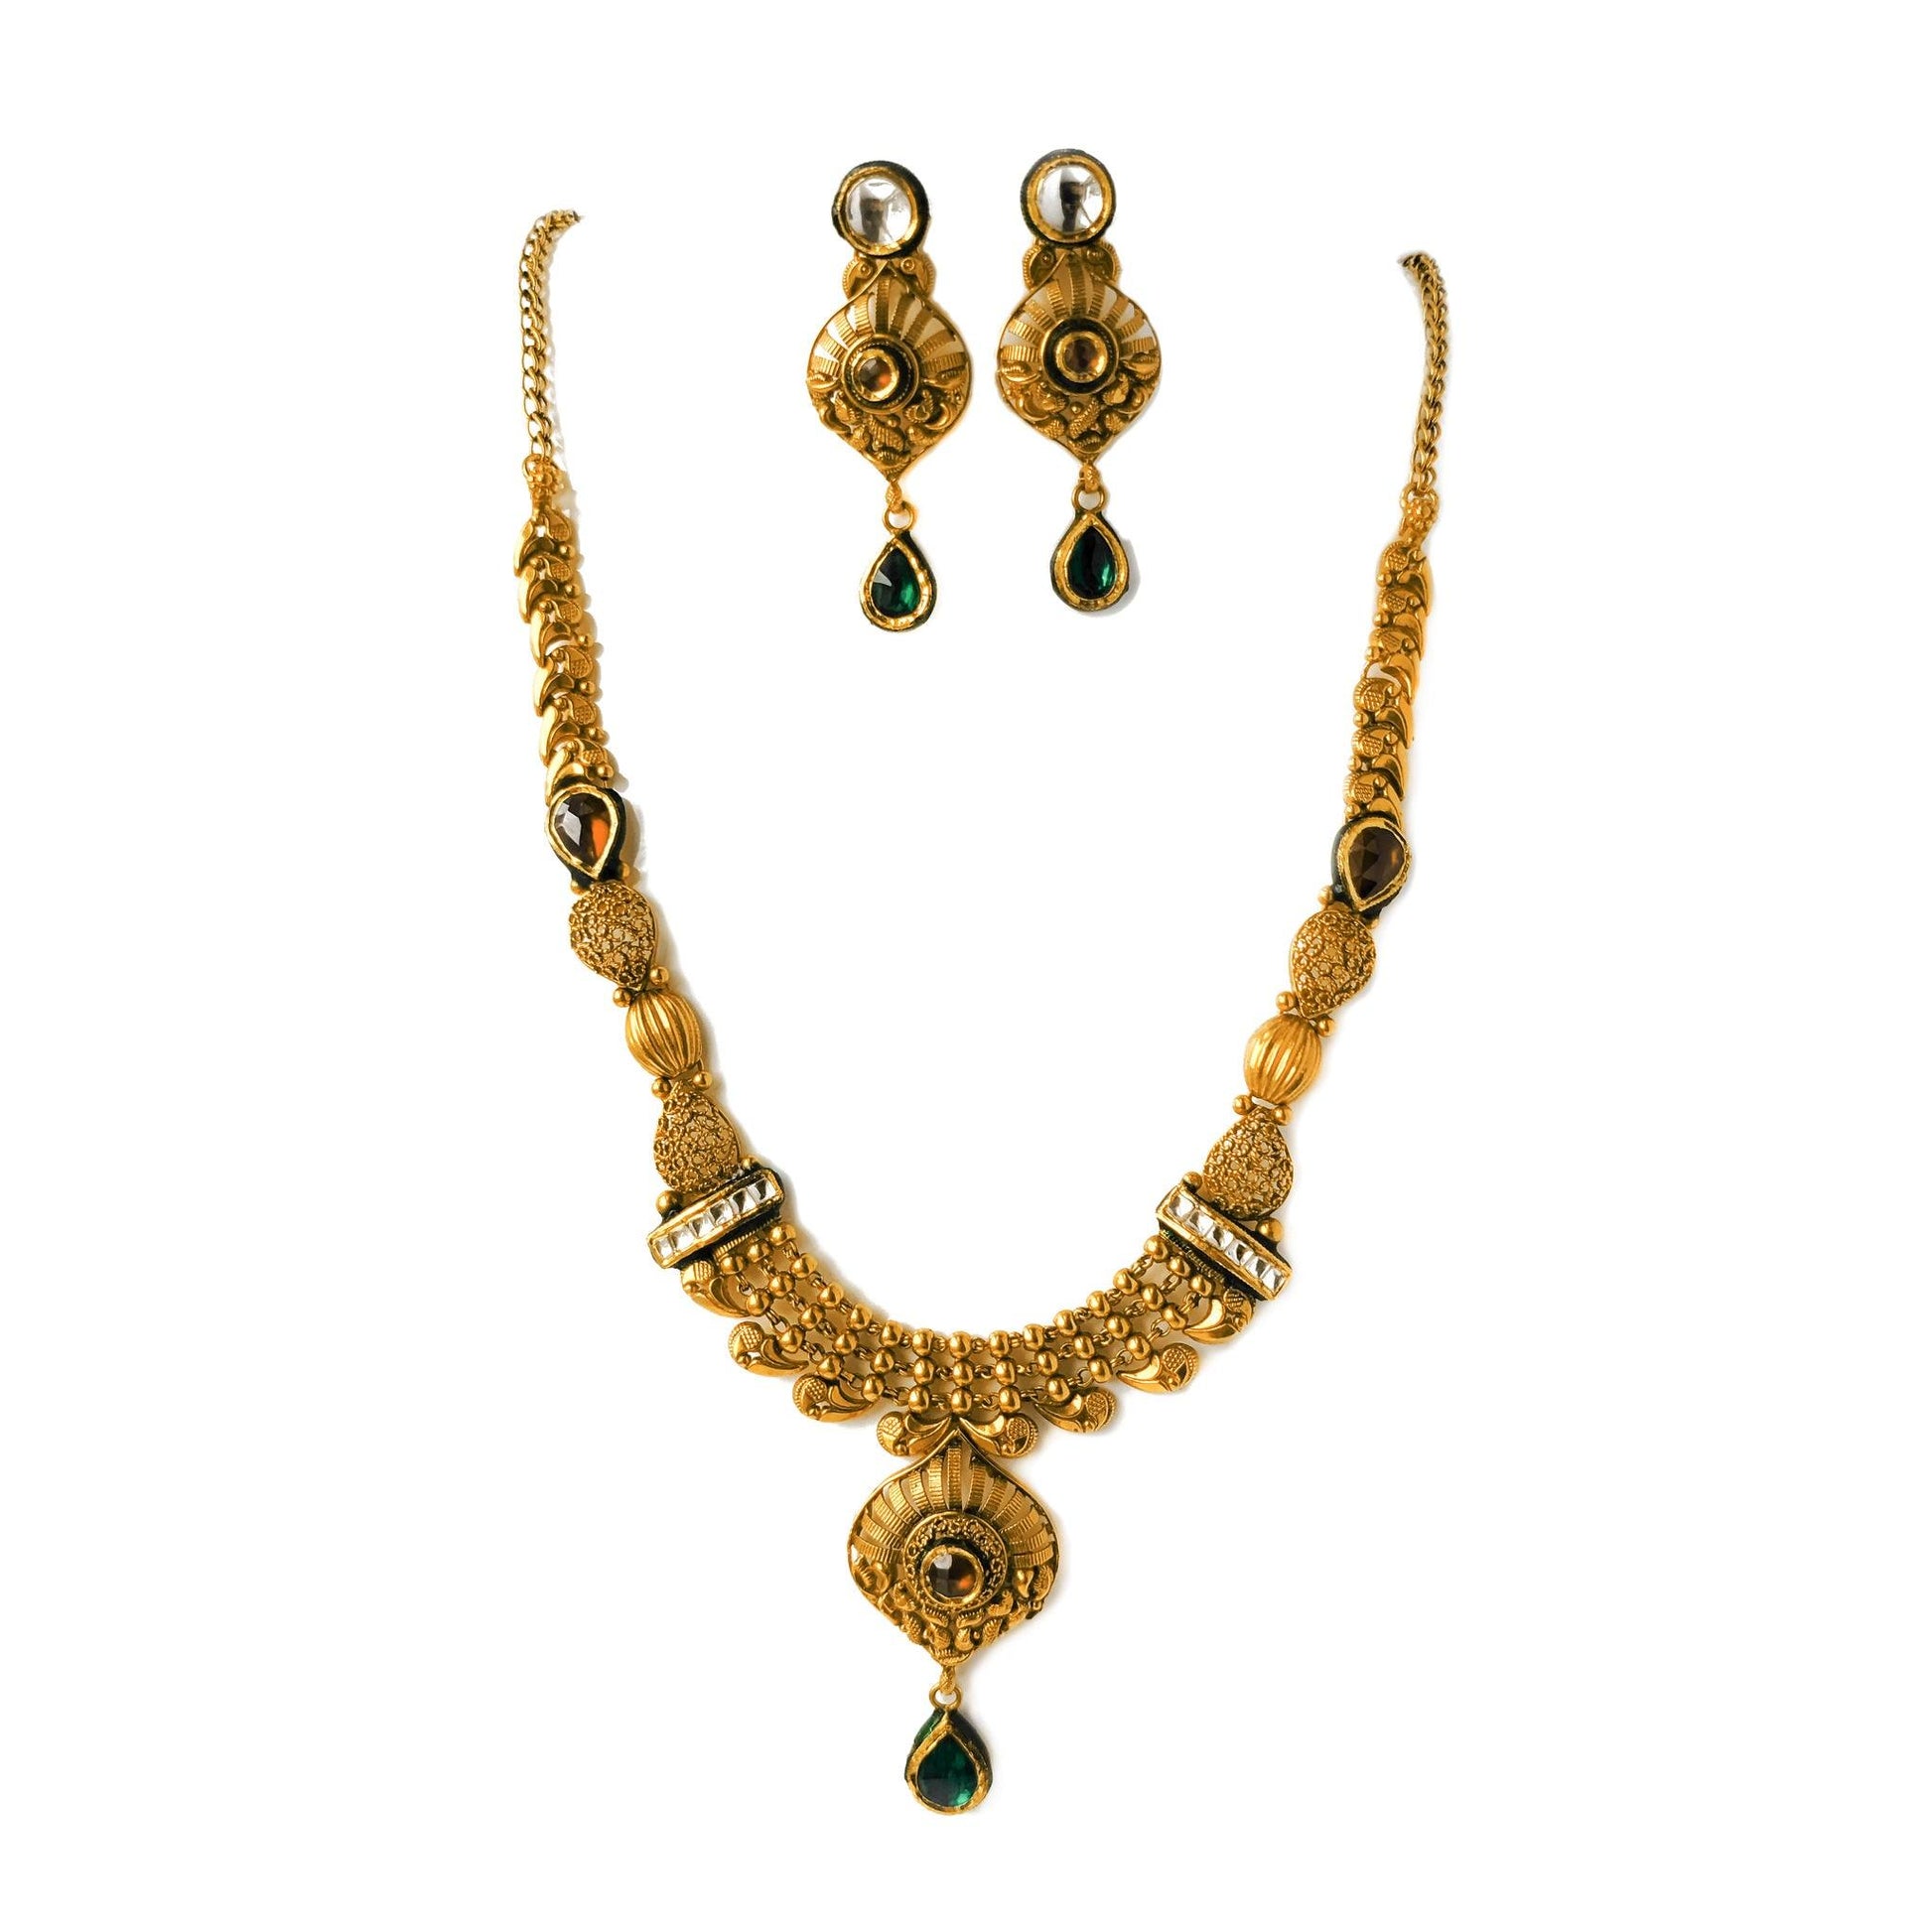 22ct Gold Antiquated Look Necklace set with Green, Red and White Polki Style Cubic Zirconia Stones (42.4g) N&E-8206 - Minar Jewellers